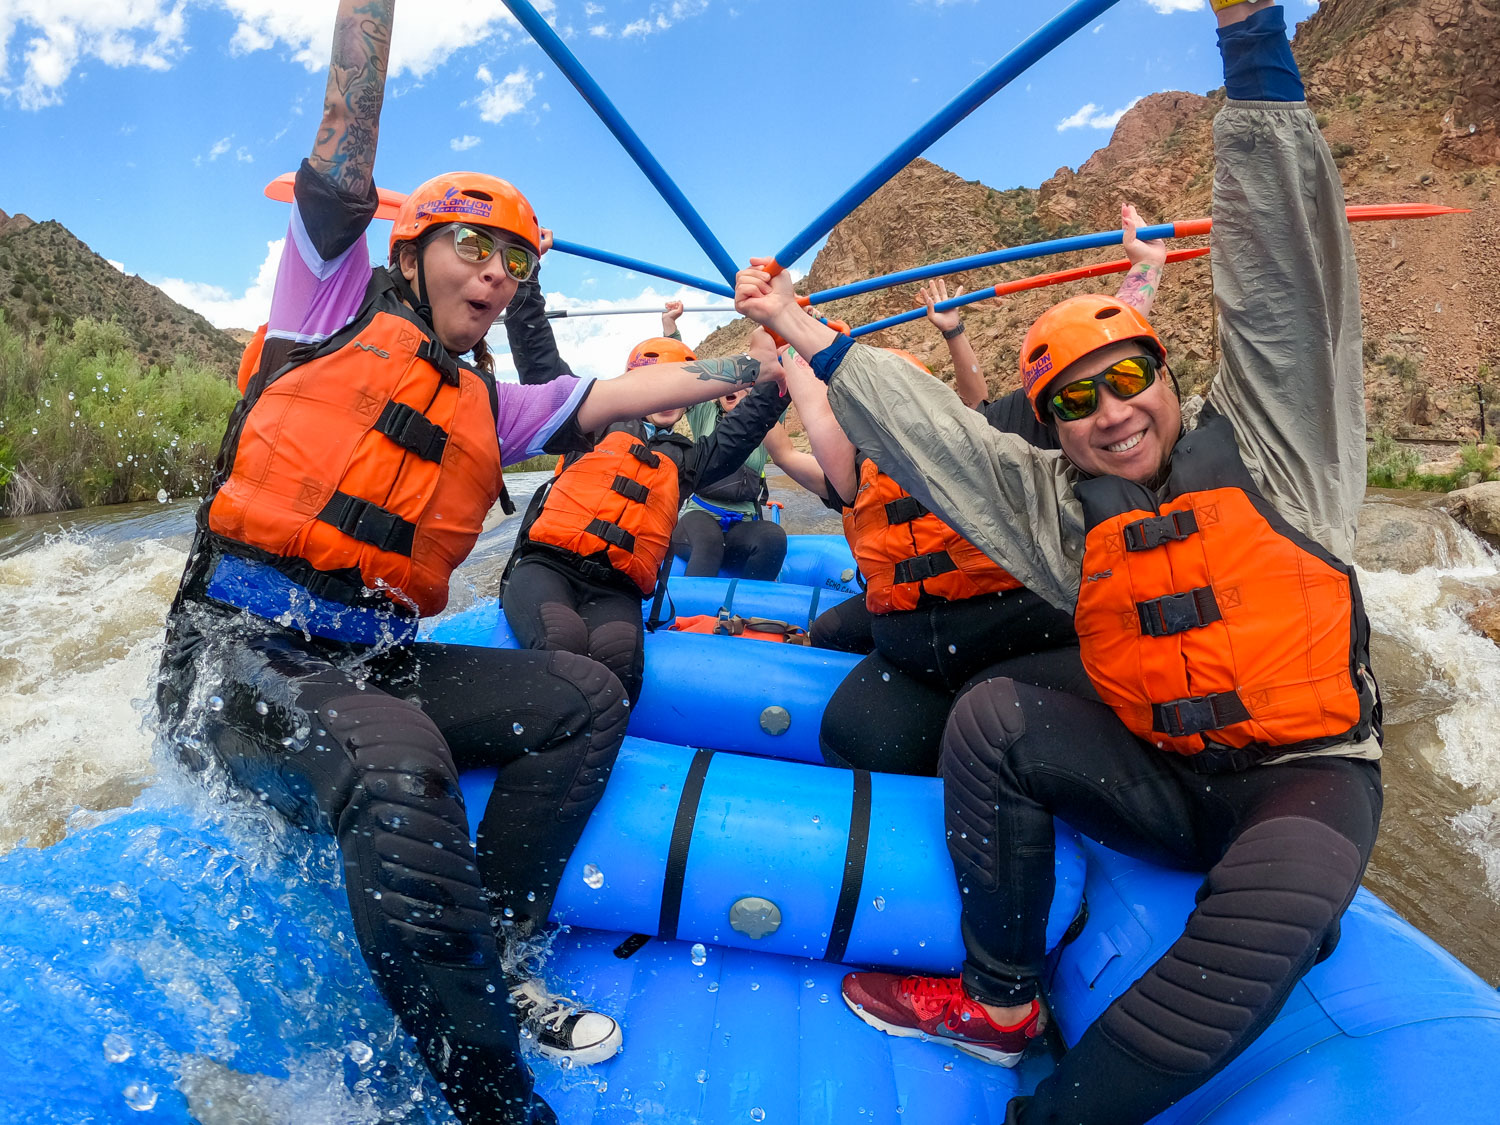 Rafters throw their paddles up in celebration after paddling a rapid